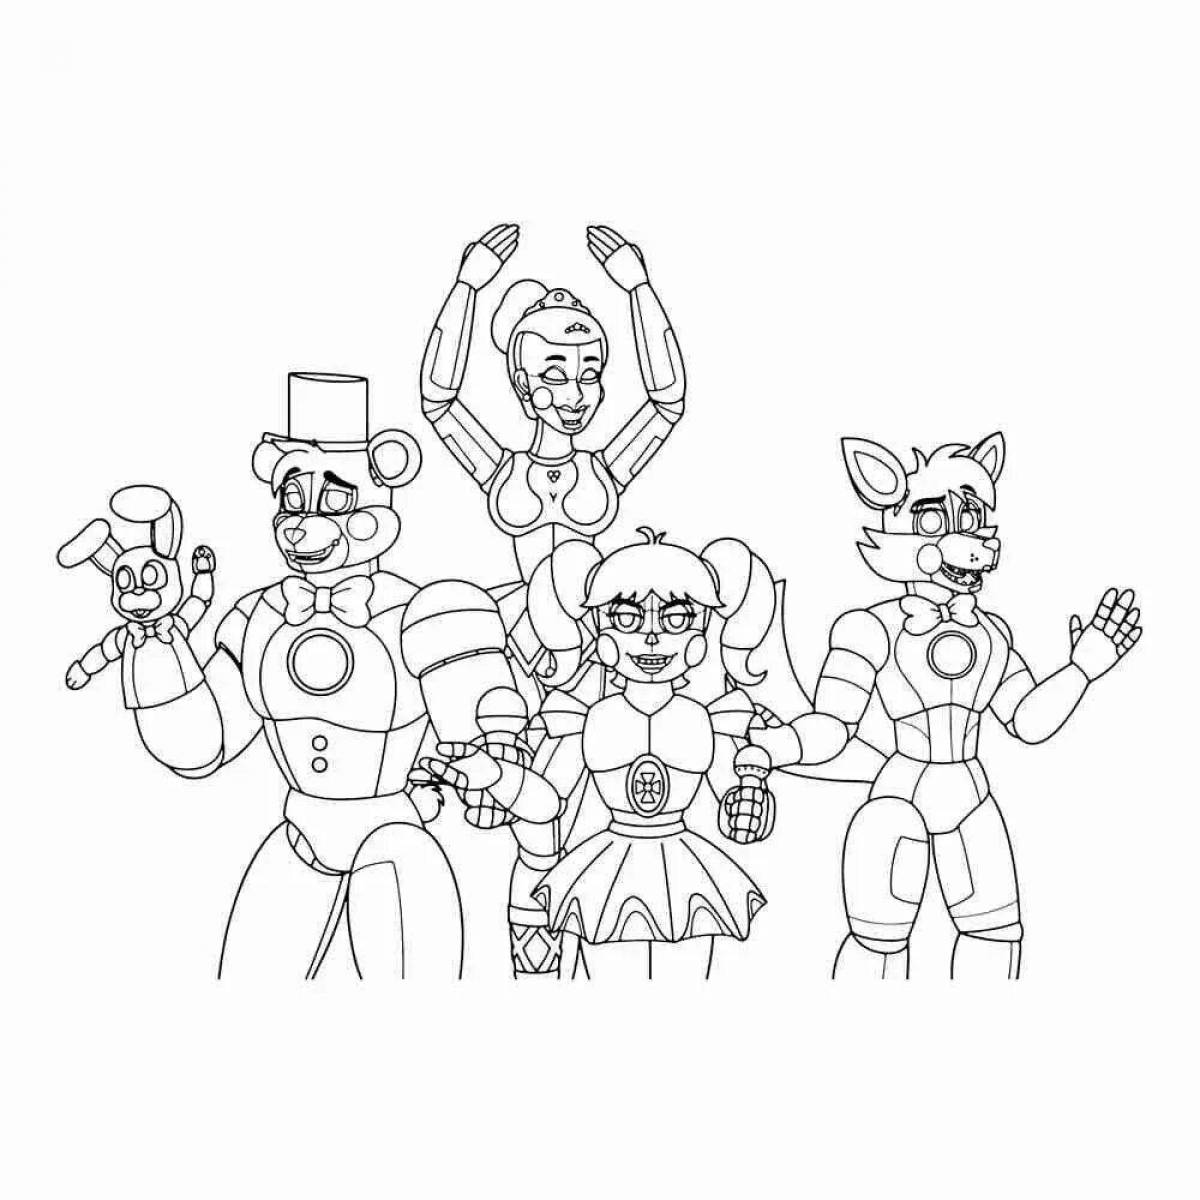 Coloring page funny circus baby